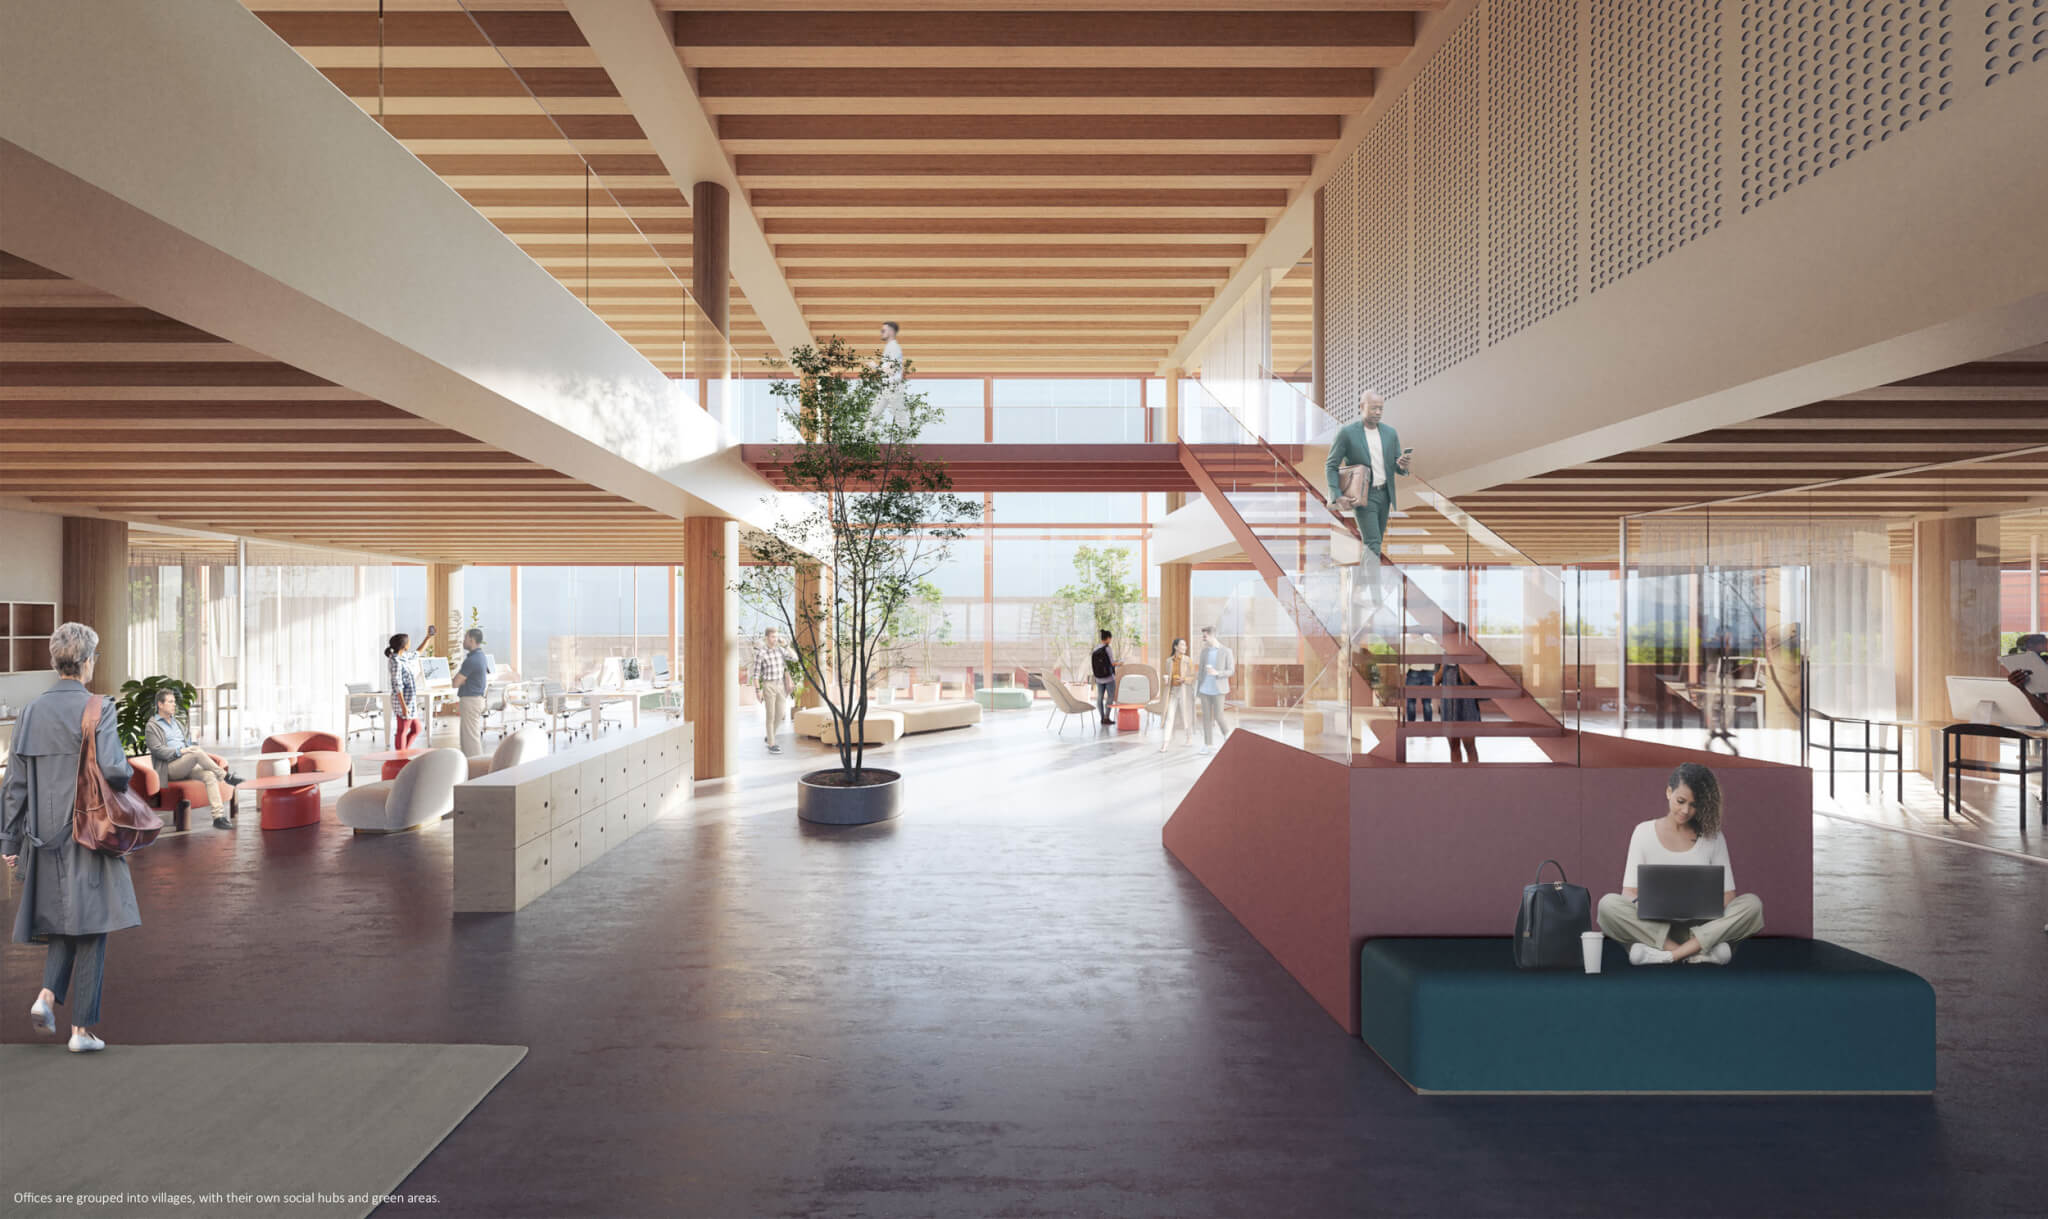 rendering interior view with wood slat ceiling and colorful platforms